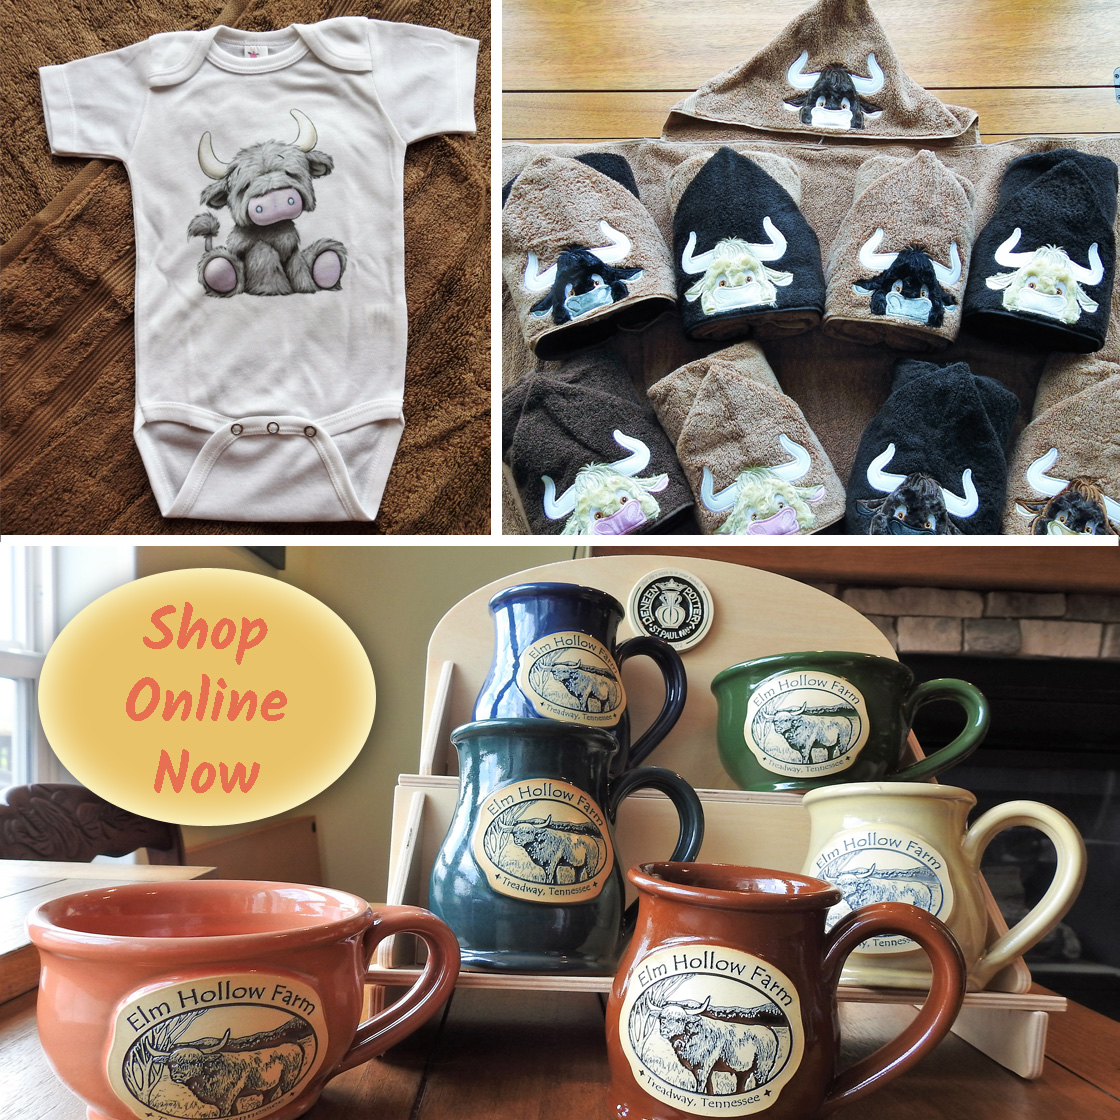 Photo collage of merchandise featuring Elm Hollow Farm name